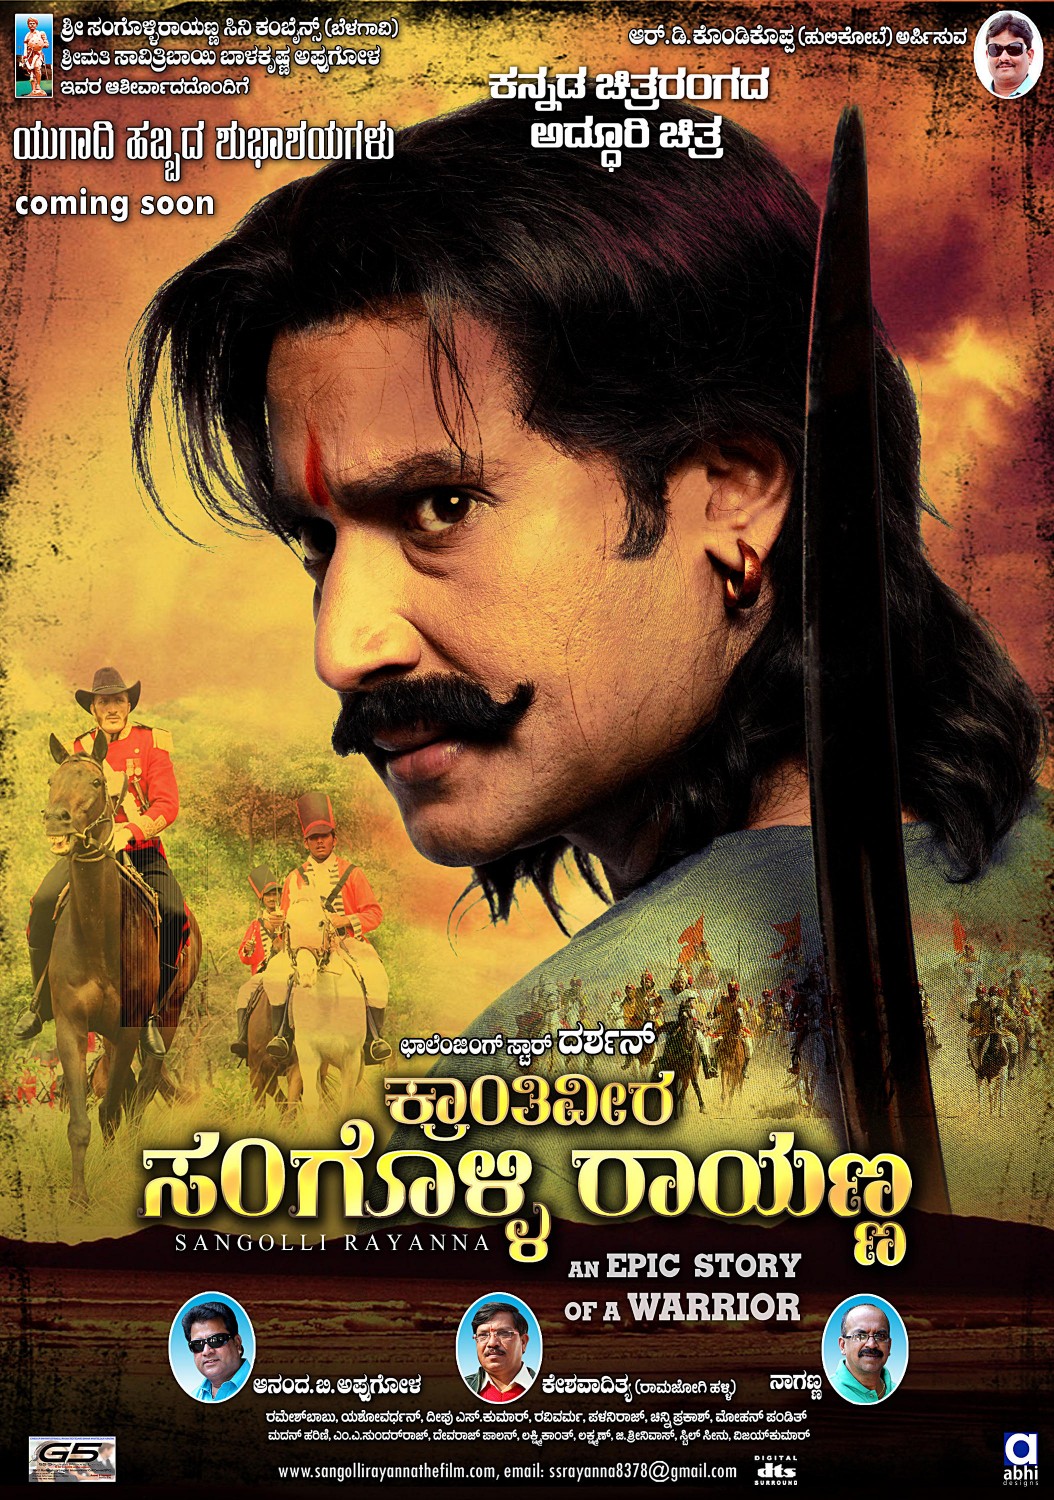 Extra Large Movie Poster Image for Sangolli Rayanna (#32 of 79)